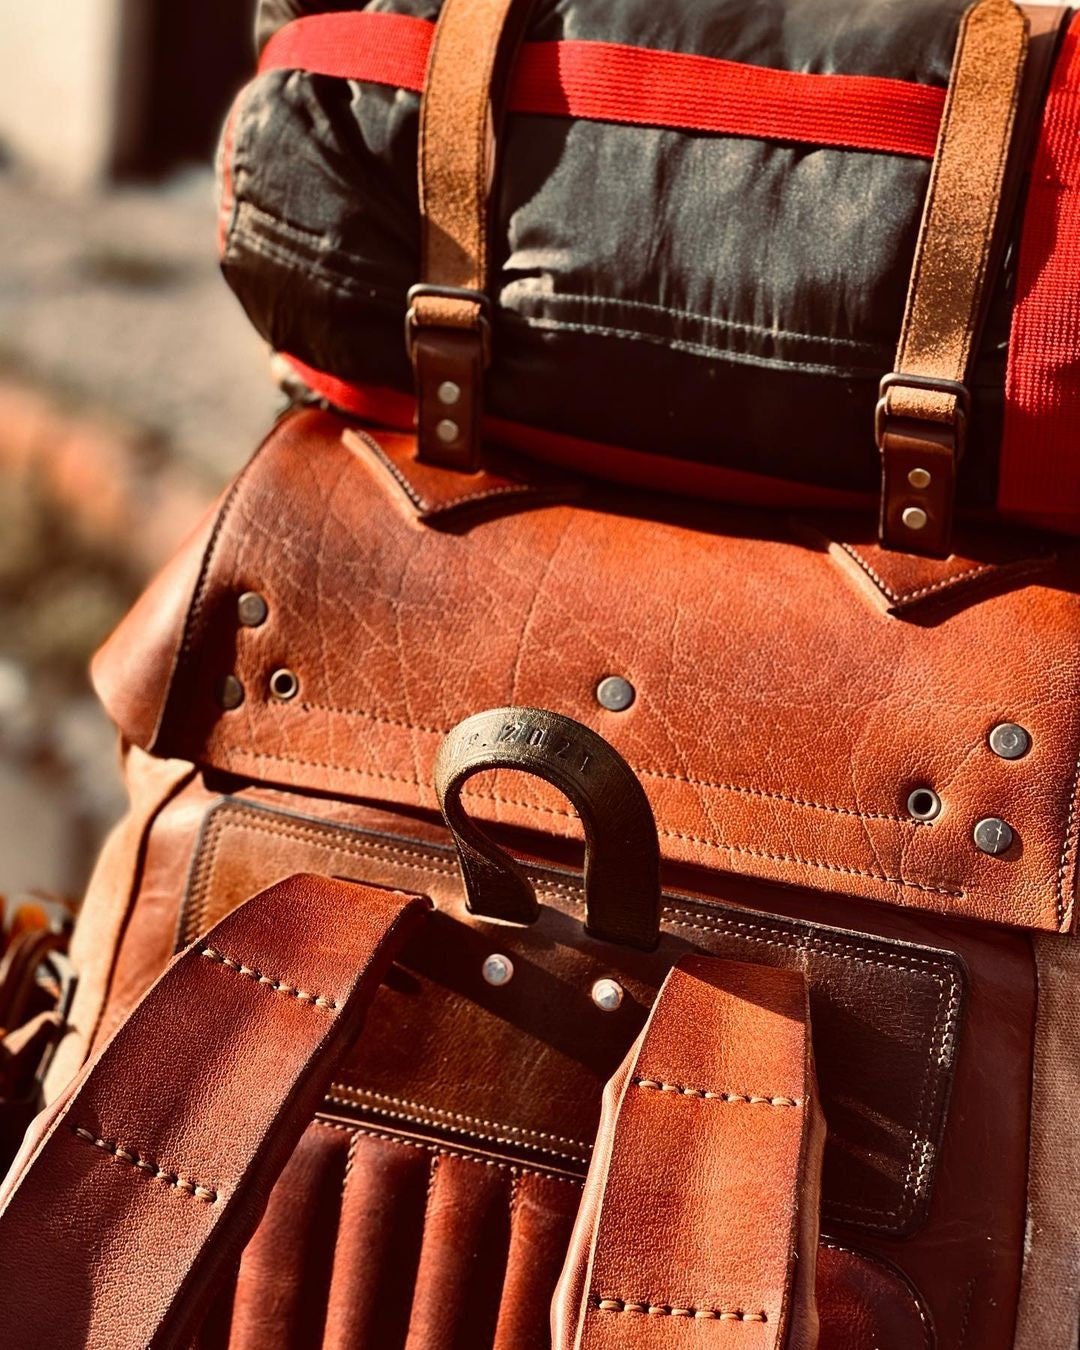 200 USD Discount | Handmade Leather, Waxed Backpack for Travel, Camping, Hunting, Bushcraft, Hiking | 45 Liter | Survival | Personalization bushcraft - camping - hiking backpack 99percenthandmade   